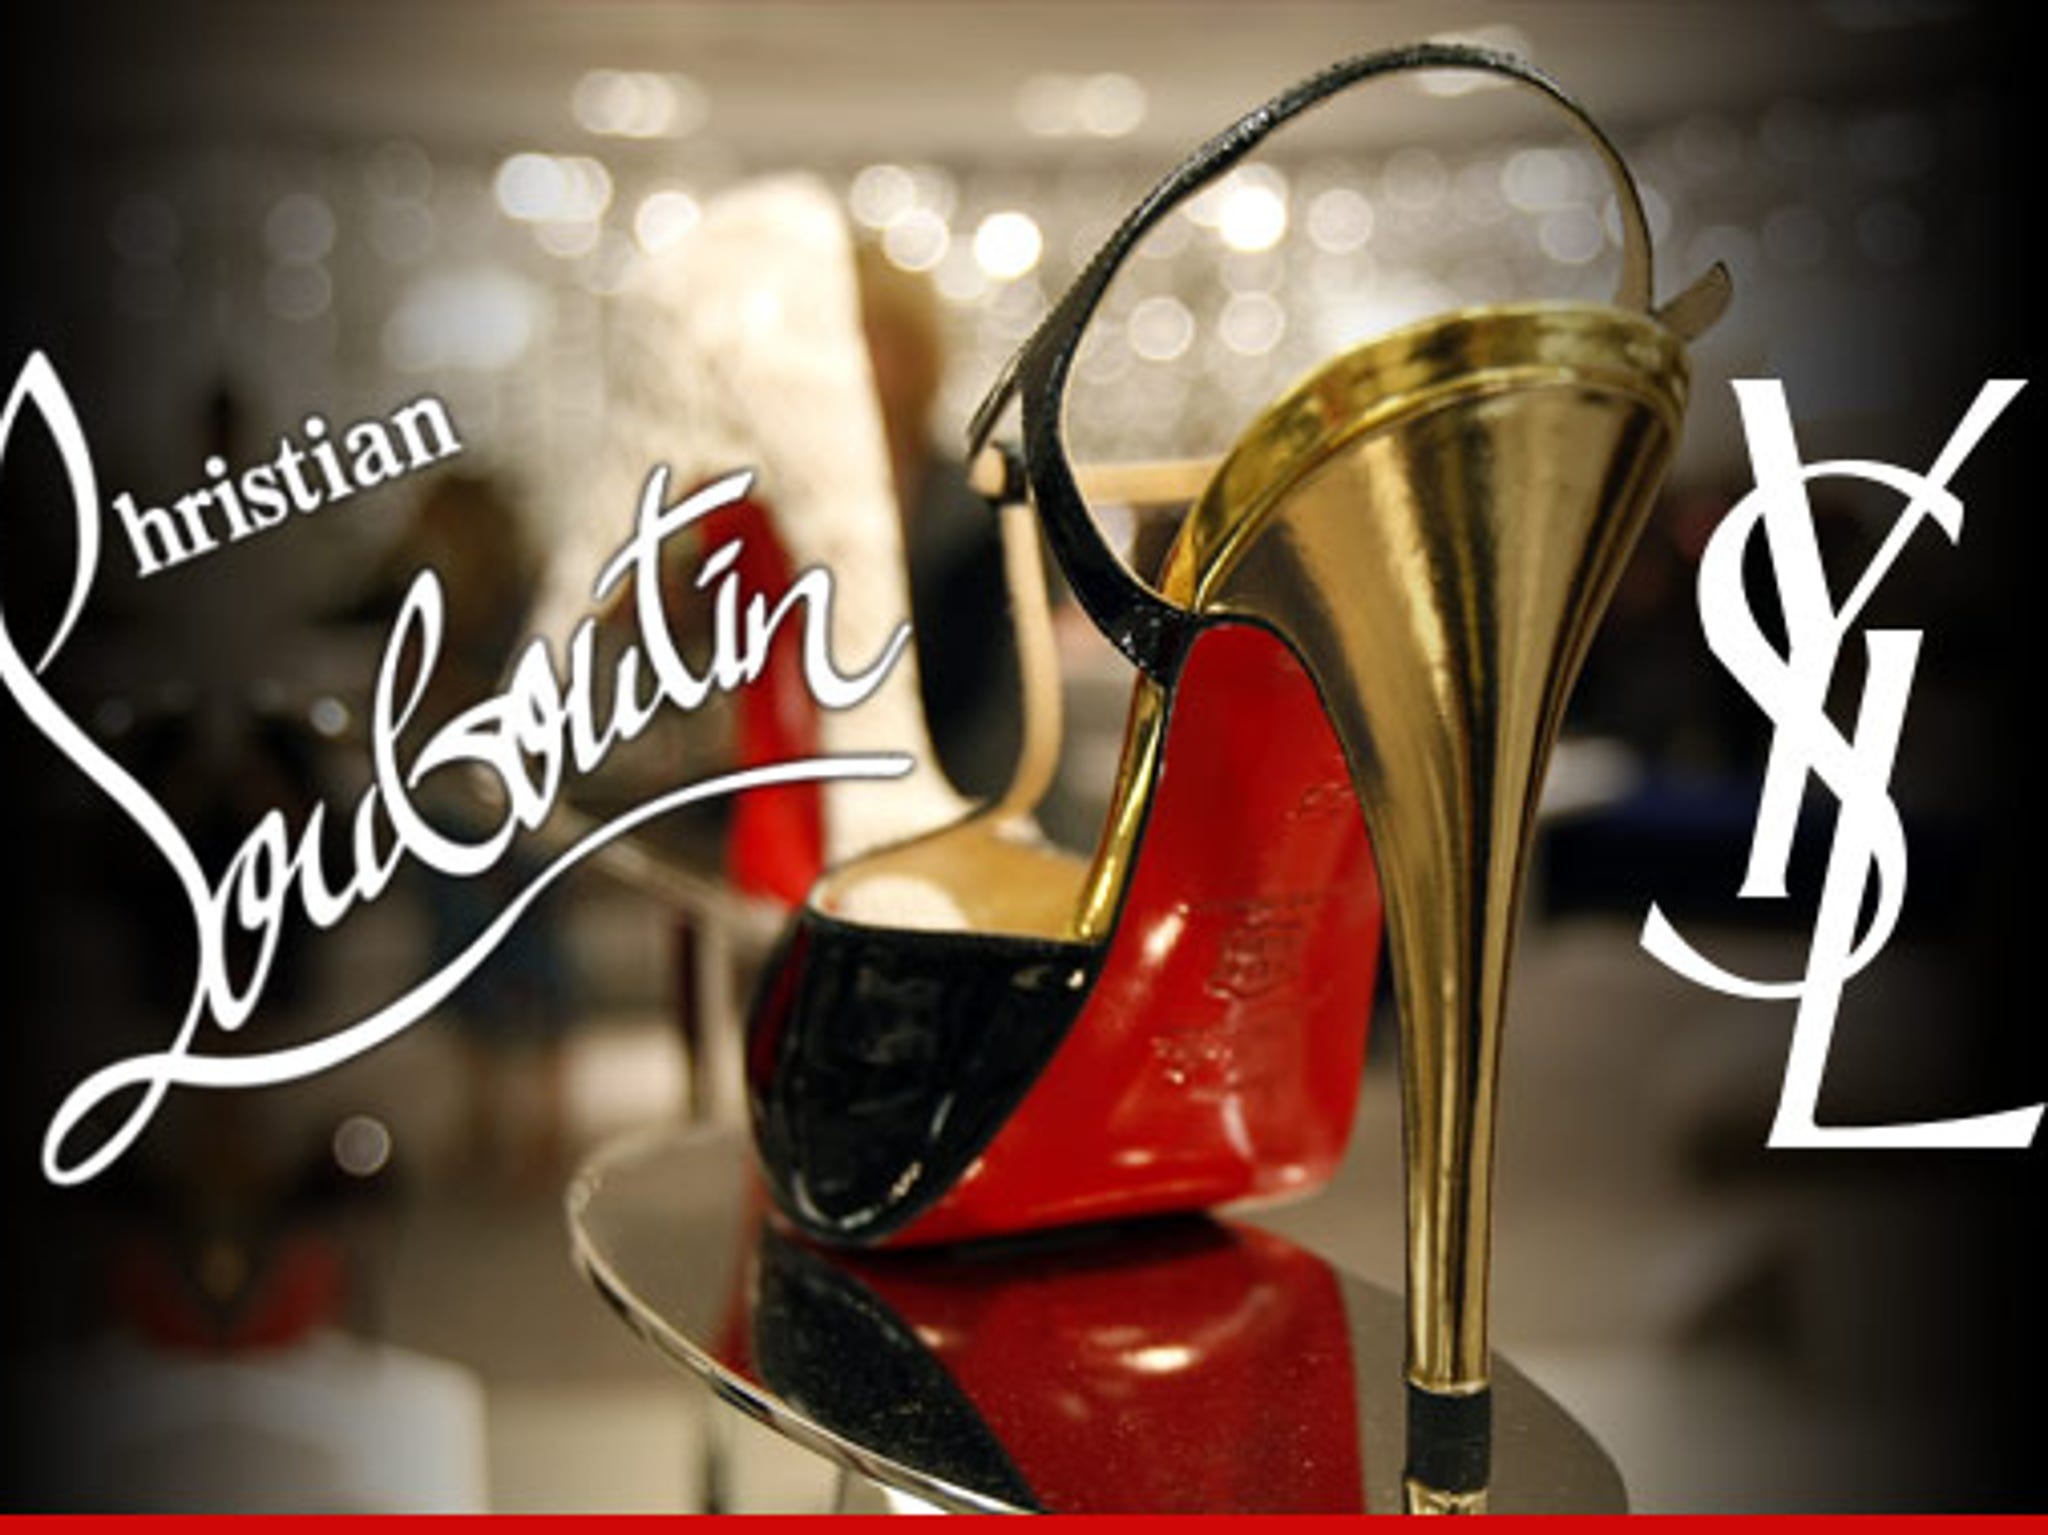 Christian Louboutin and YSL's Legal Battle Over Red Soles - Fall Fashion  2011 -- New York Magazine - Nymag